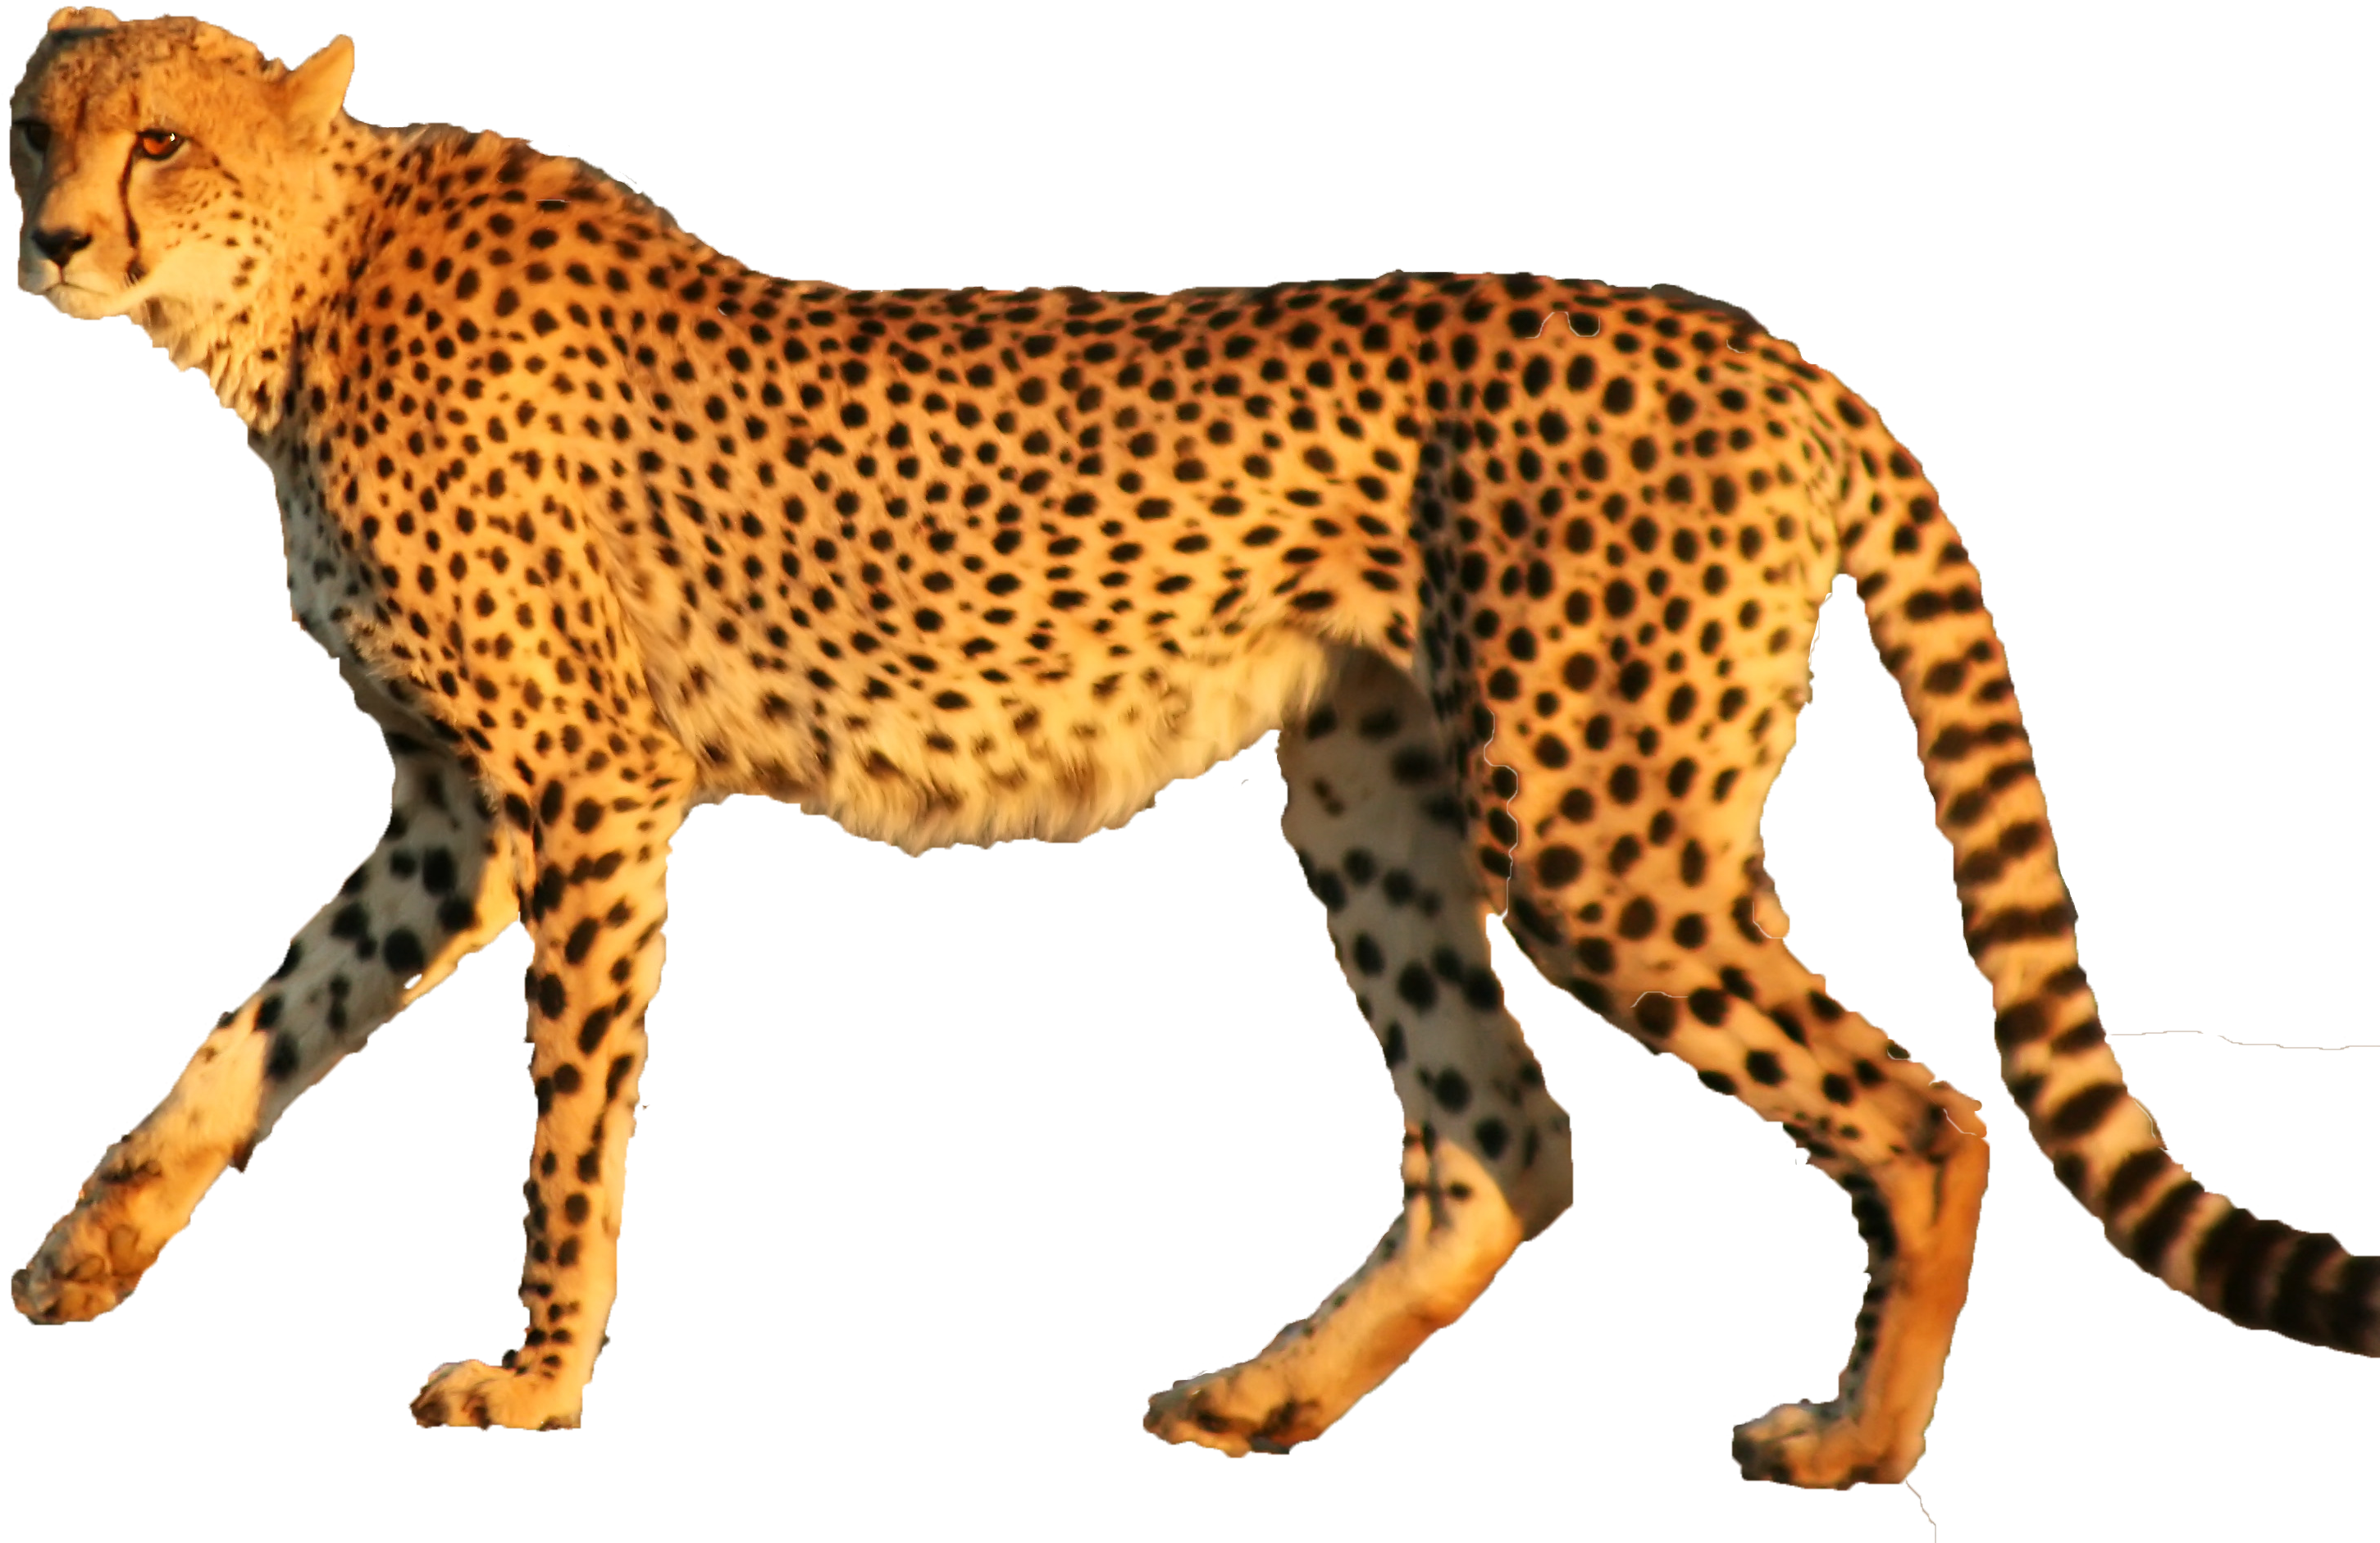 A Cheetah Walking With Black Background